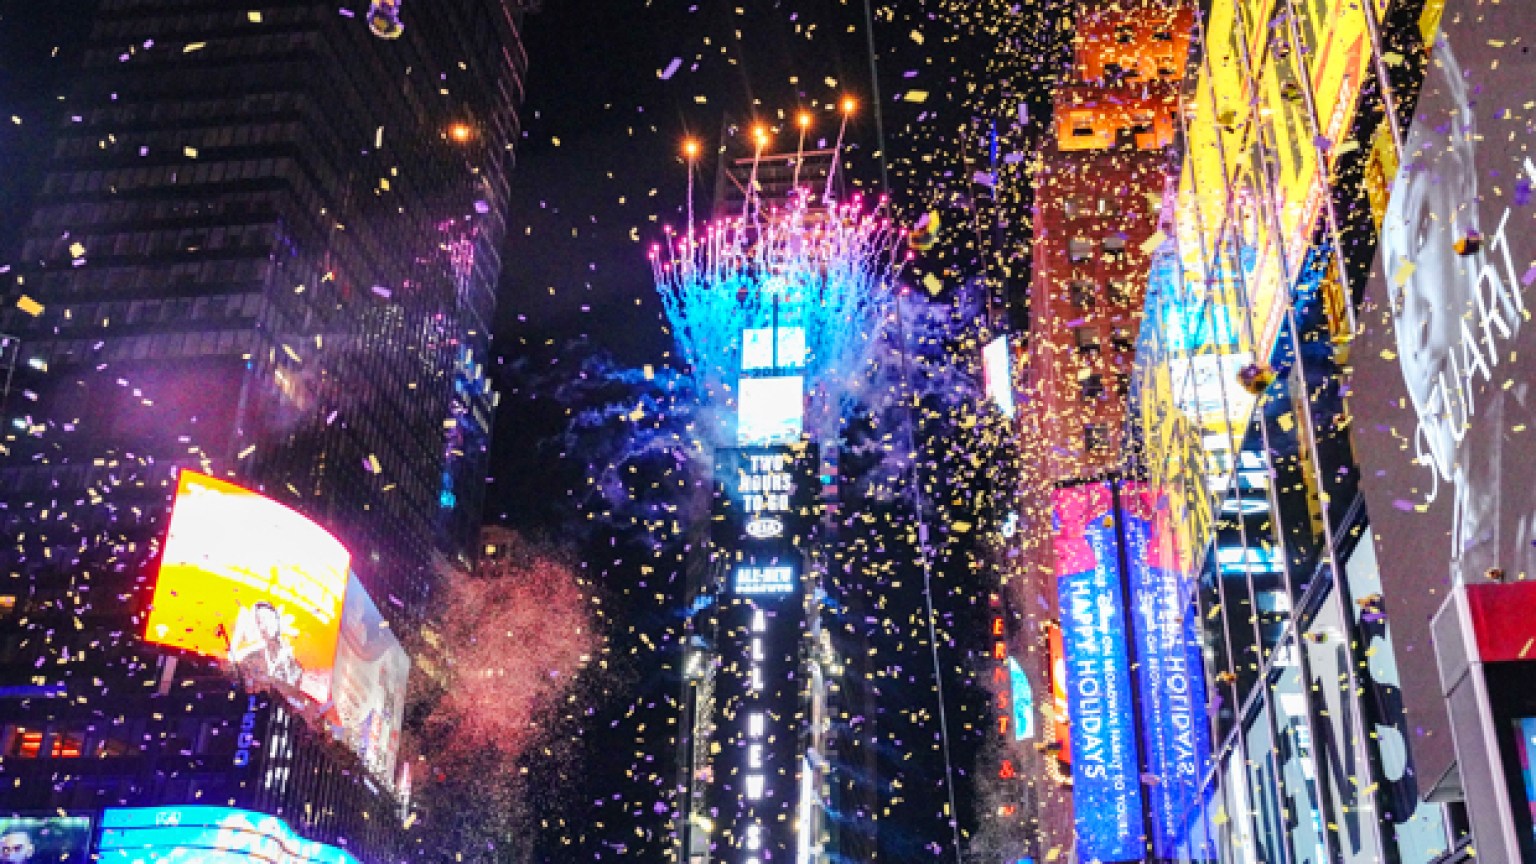 How To Watch The Ball Drop Live On New Year’s Eve 2022 Livestream